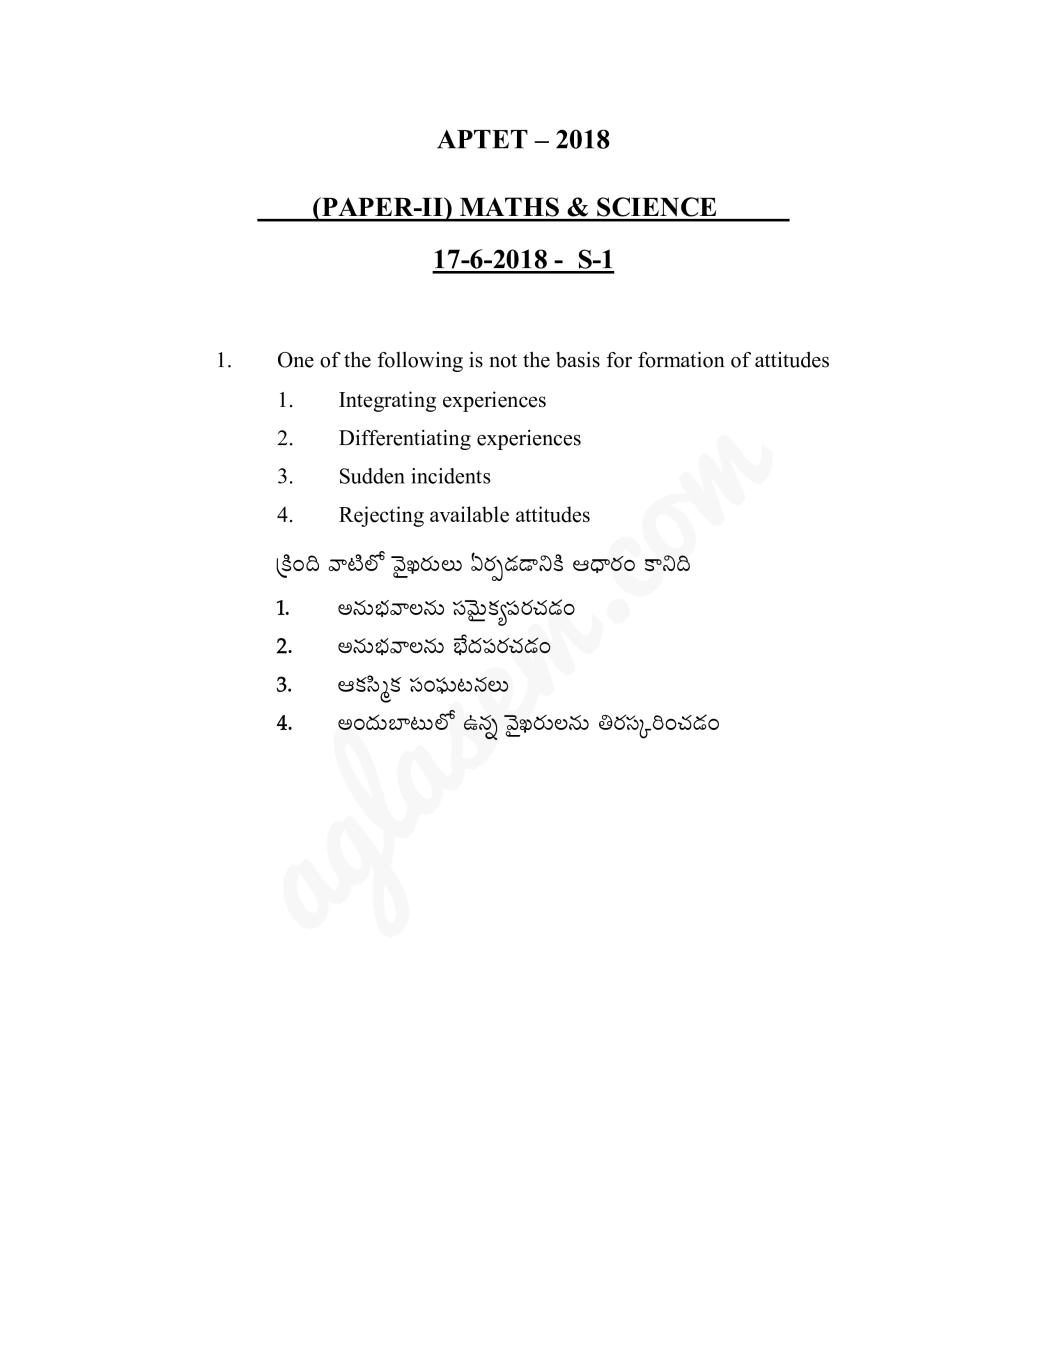 APTET Question Paper with Answers 17 Jun 2018 Paper 2 Maths and Science (Shift 1) - Page 1